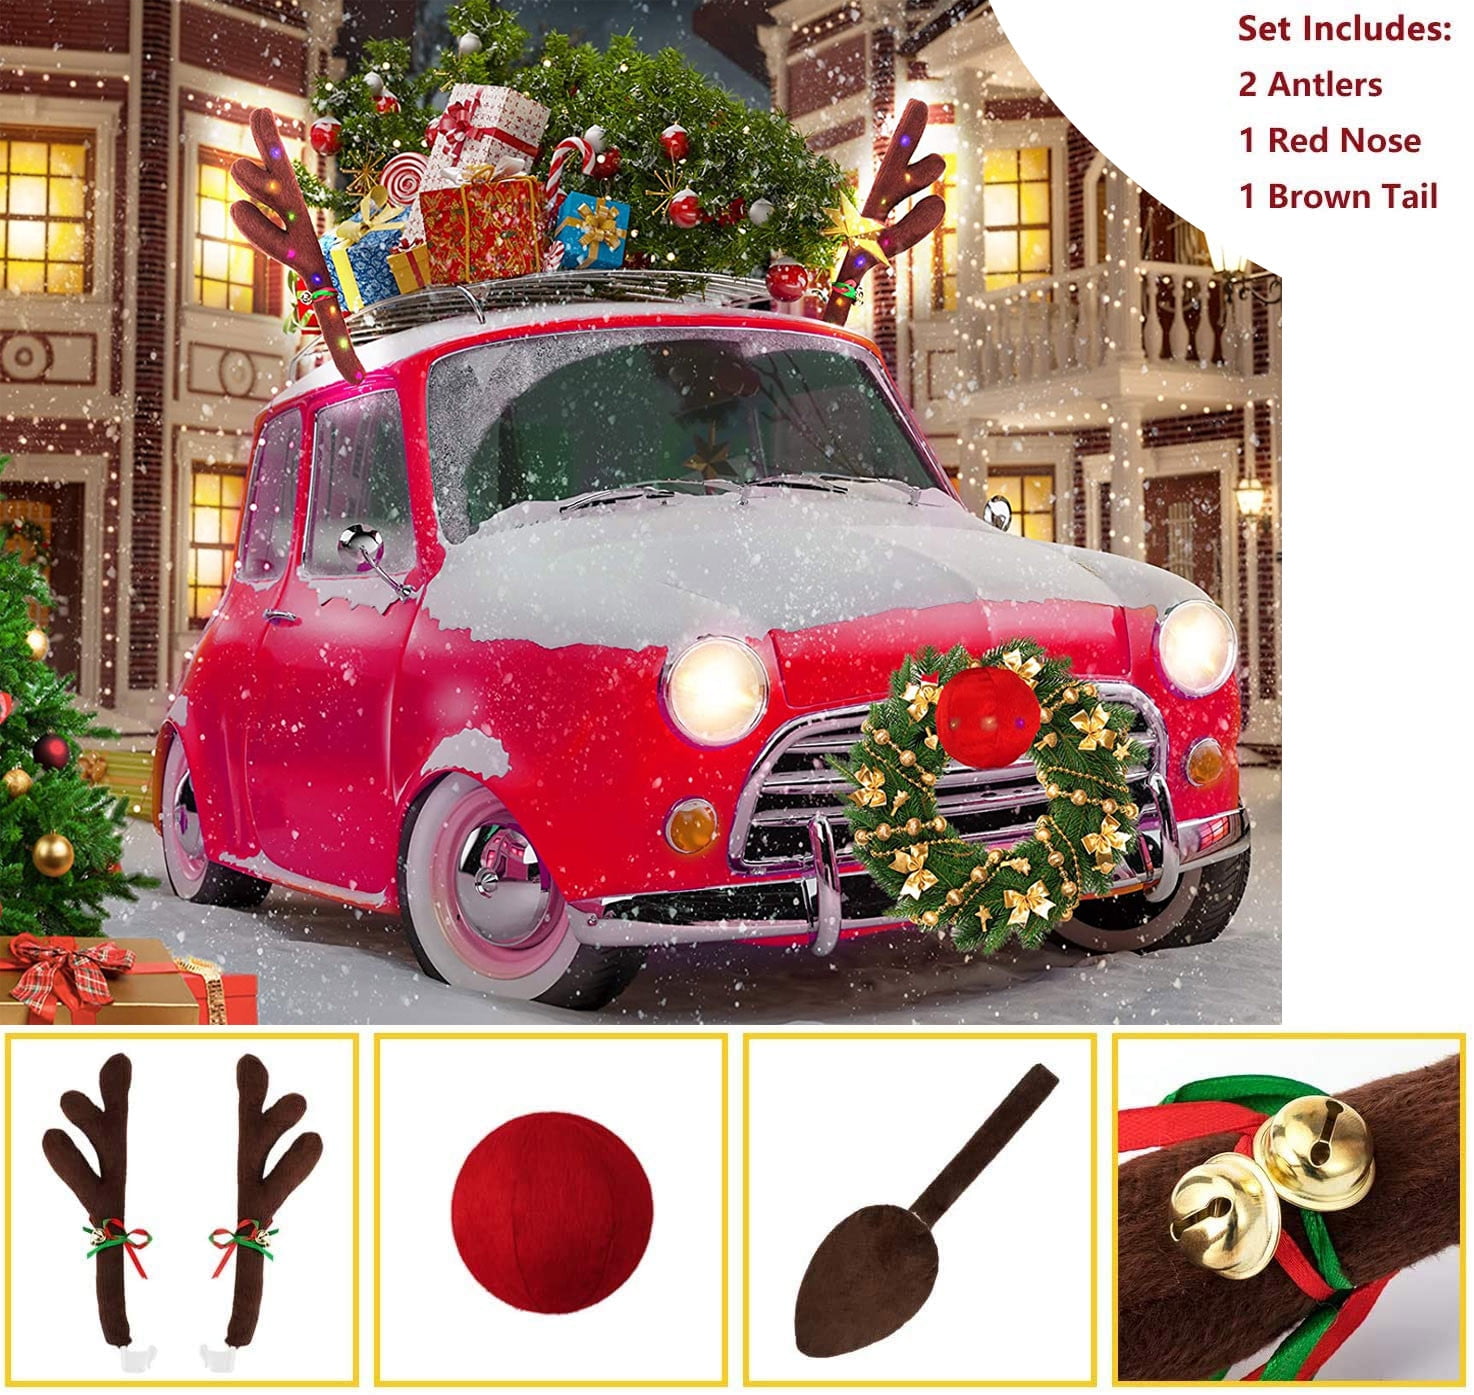 XMAS Rudolph Car Costume Christmas Reindeer Antlers&Red Nose For Truck SUV-Decor 